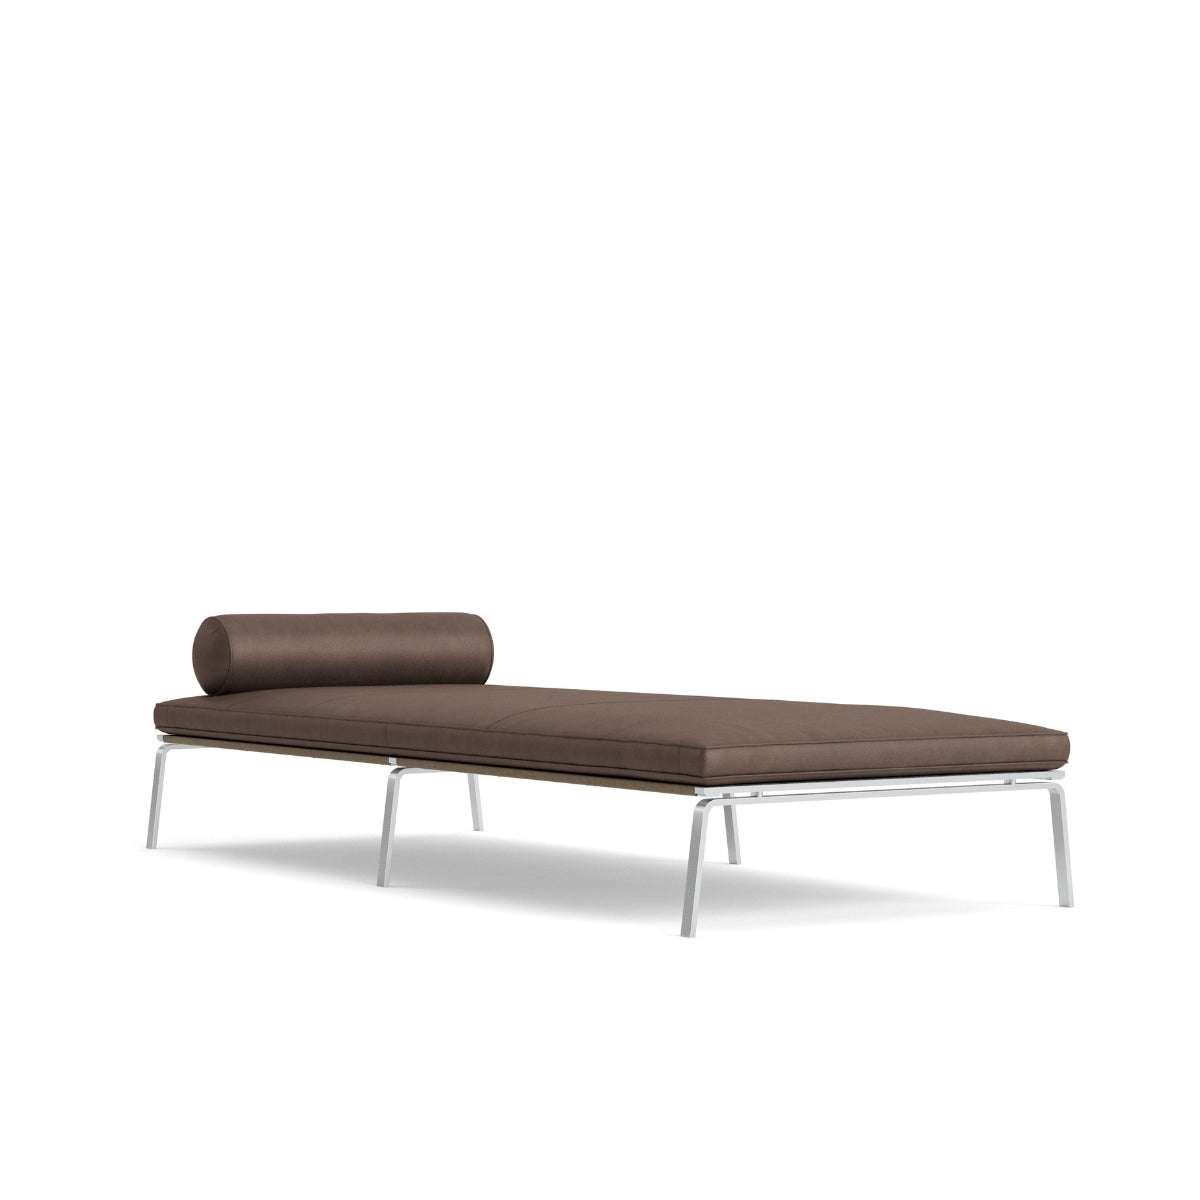 NORR11 | Man daybed